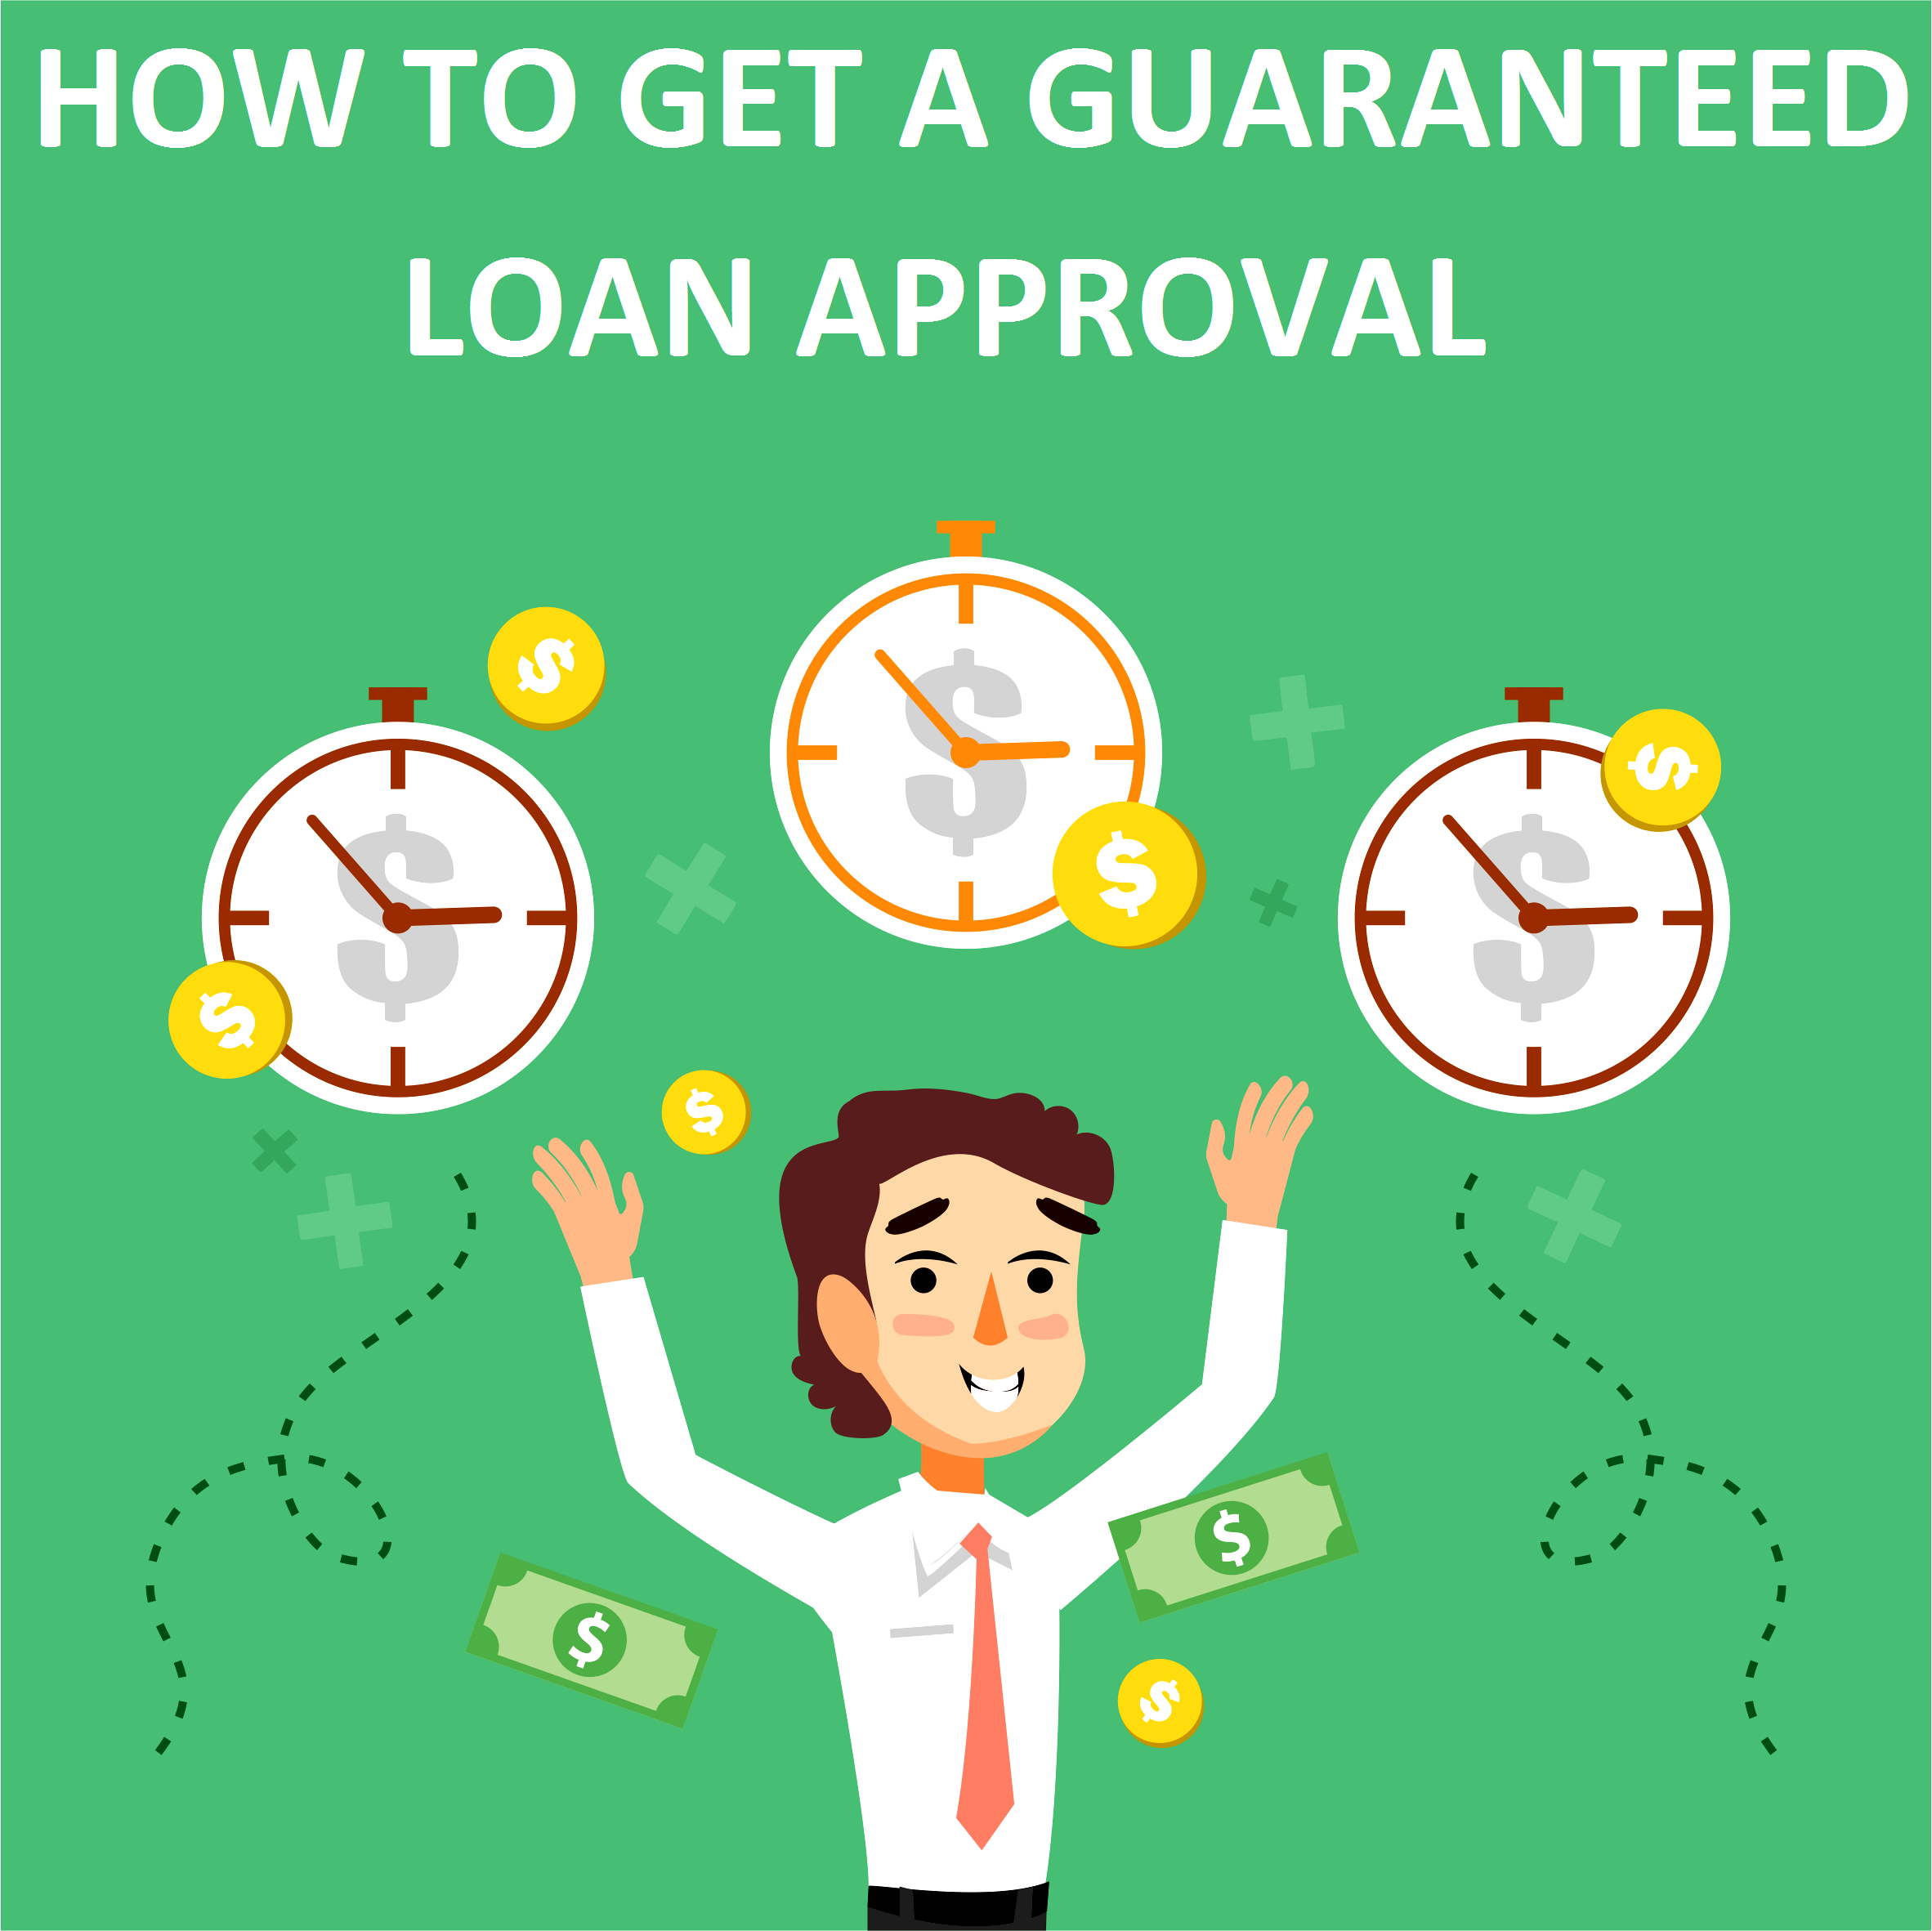 How To Get A Guaranteed Loan Approval?